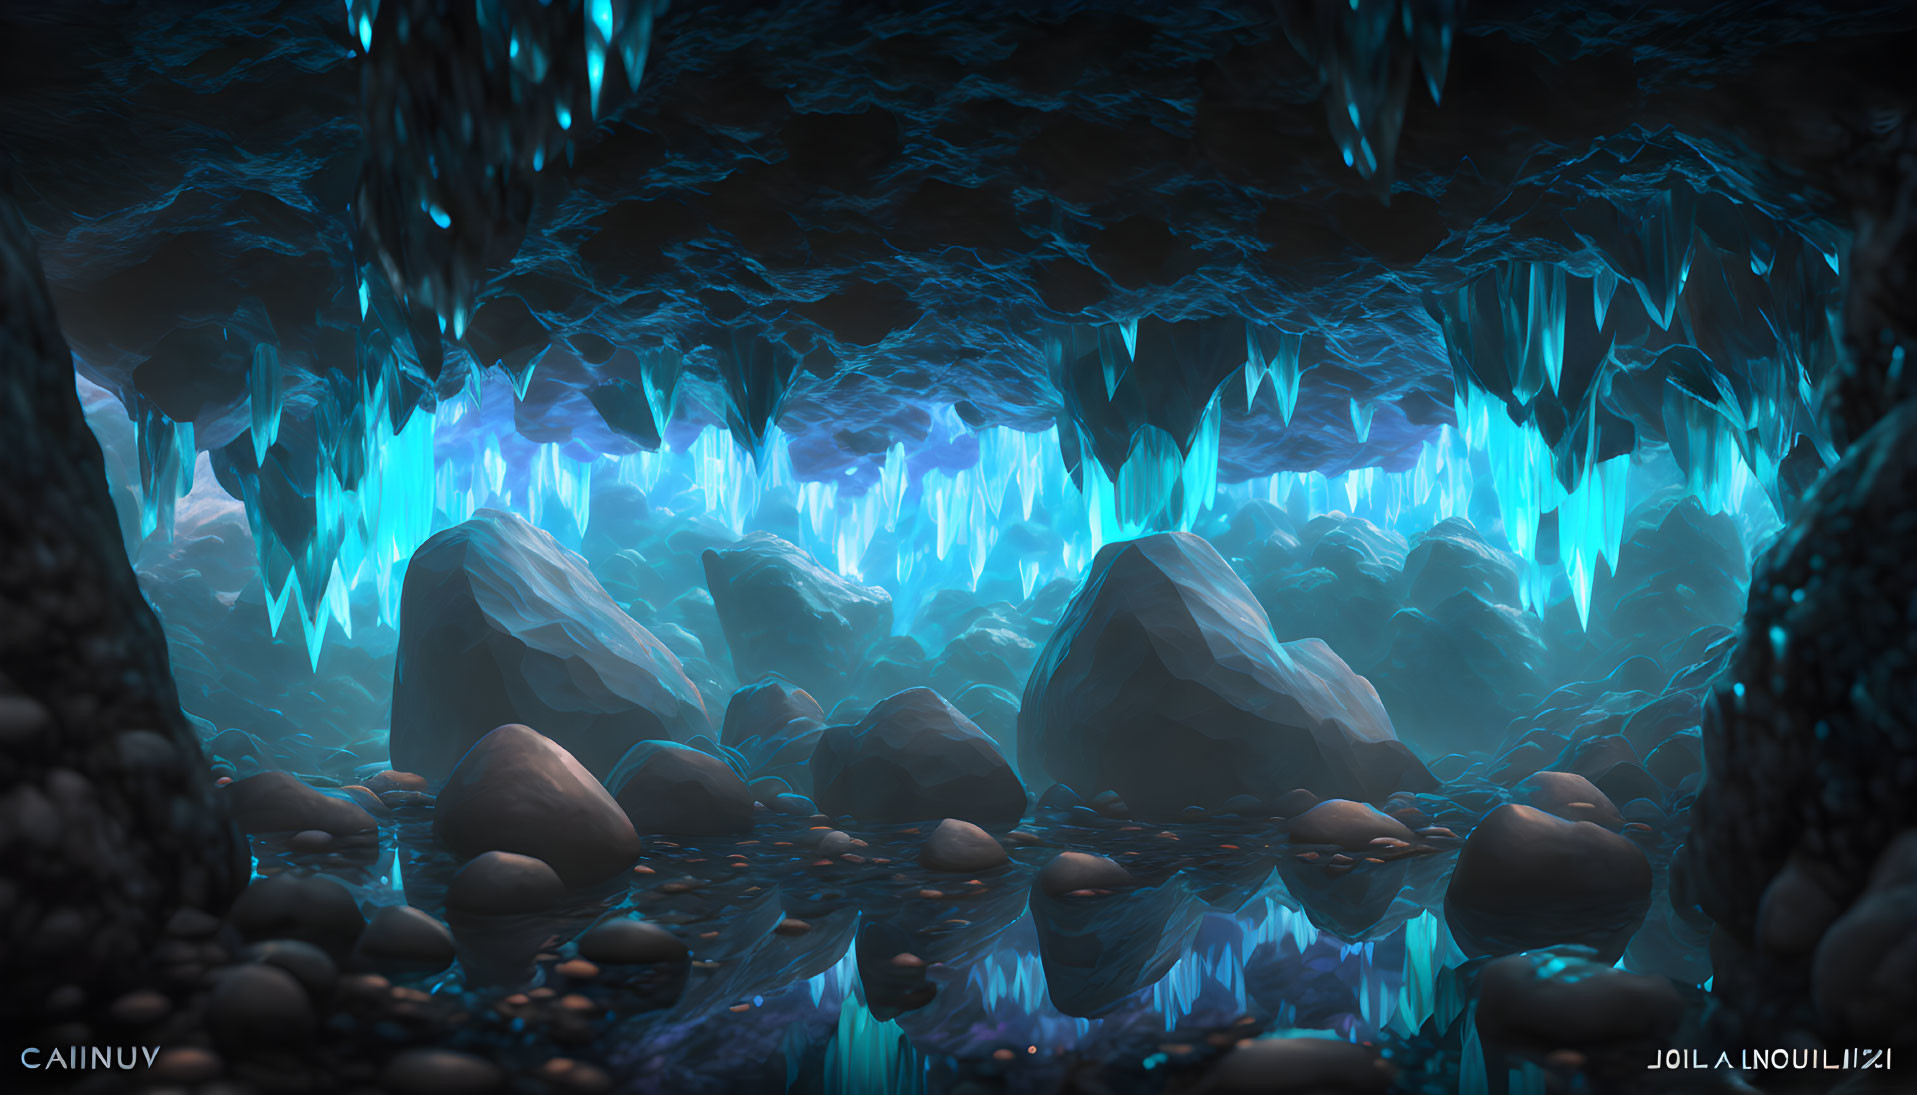 Mystic underground cave with glowing blue crystals, stalactites, and reflective water surface.